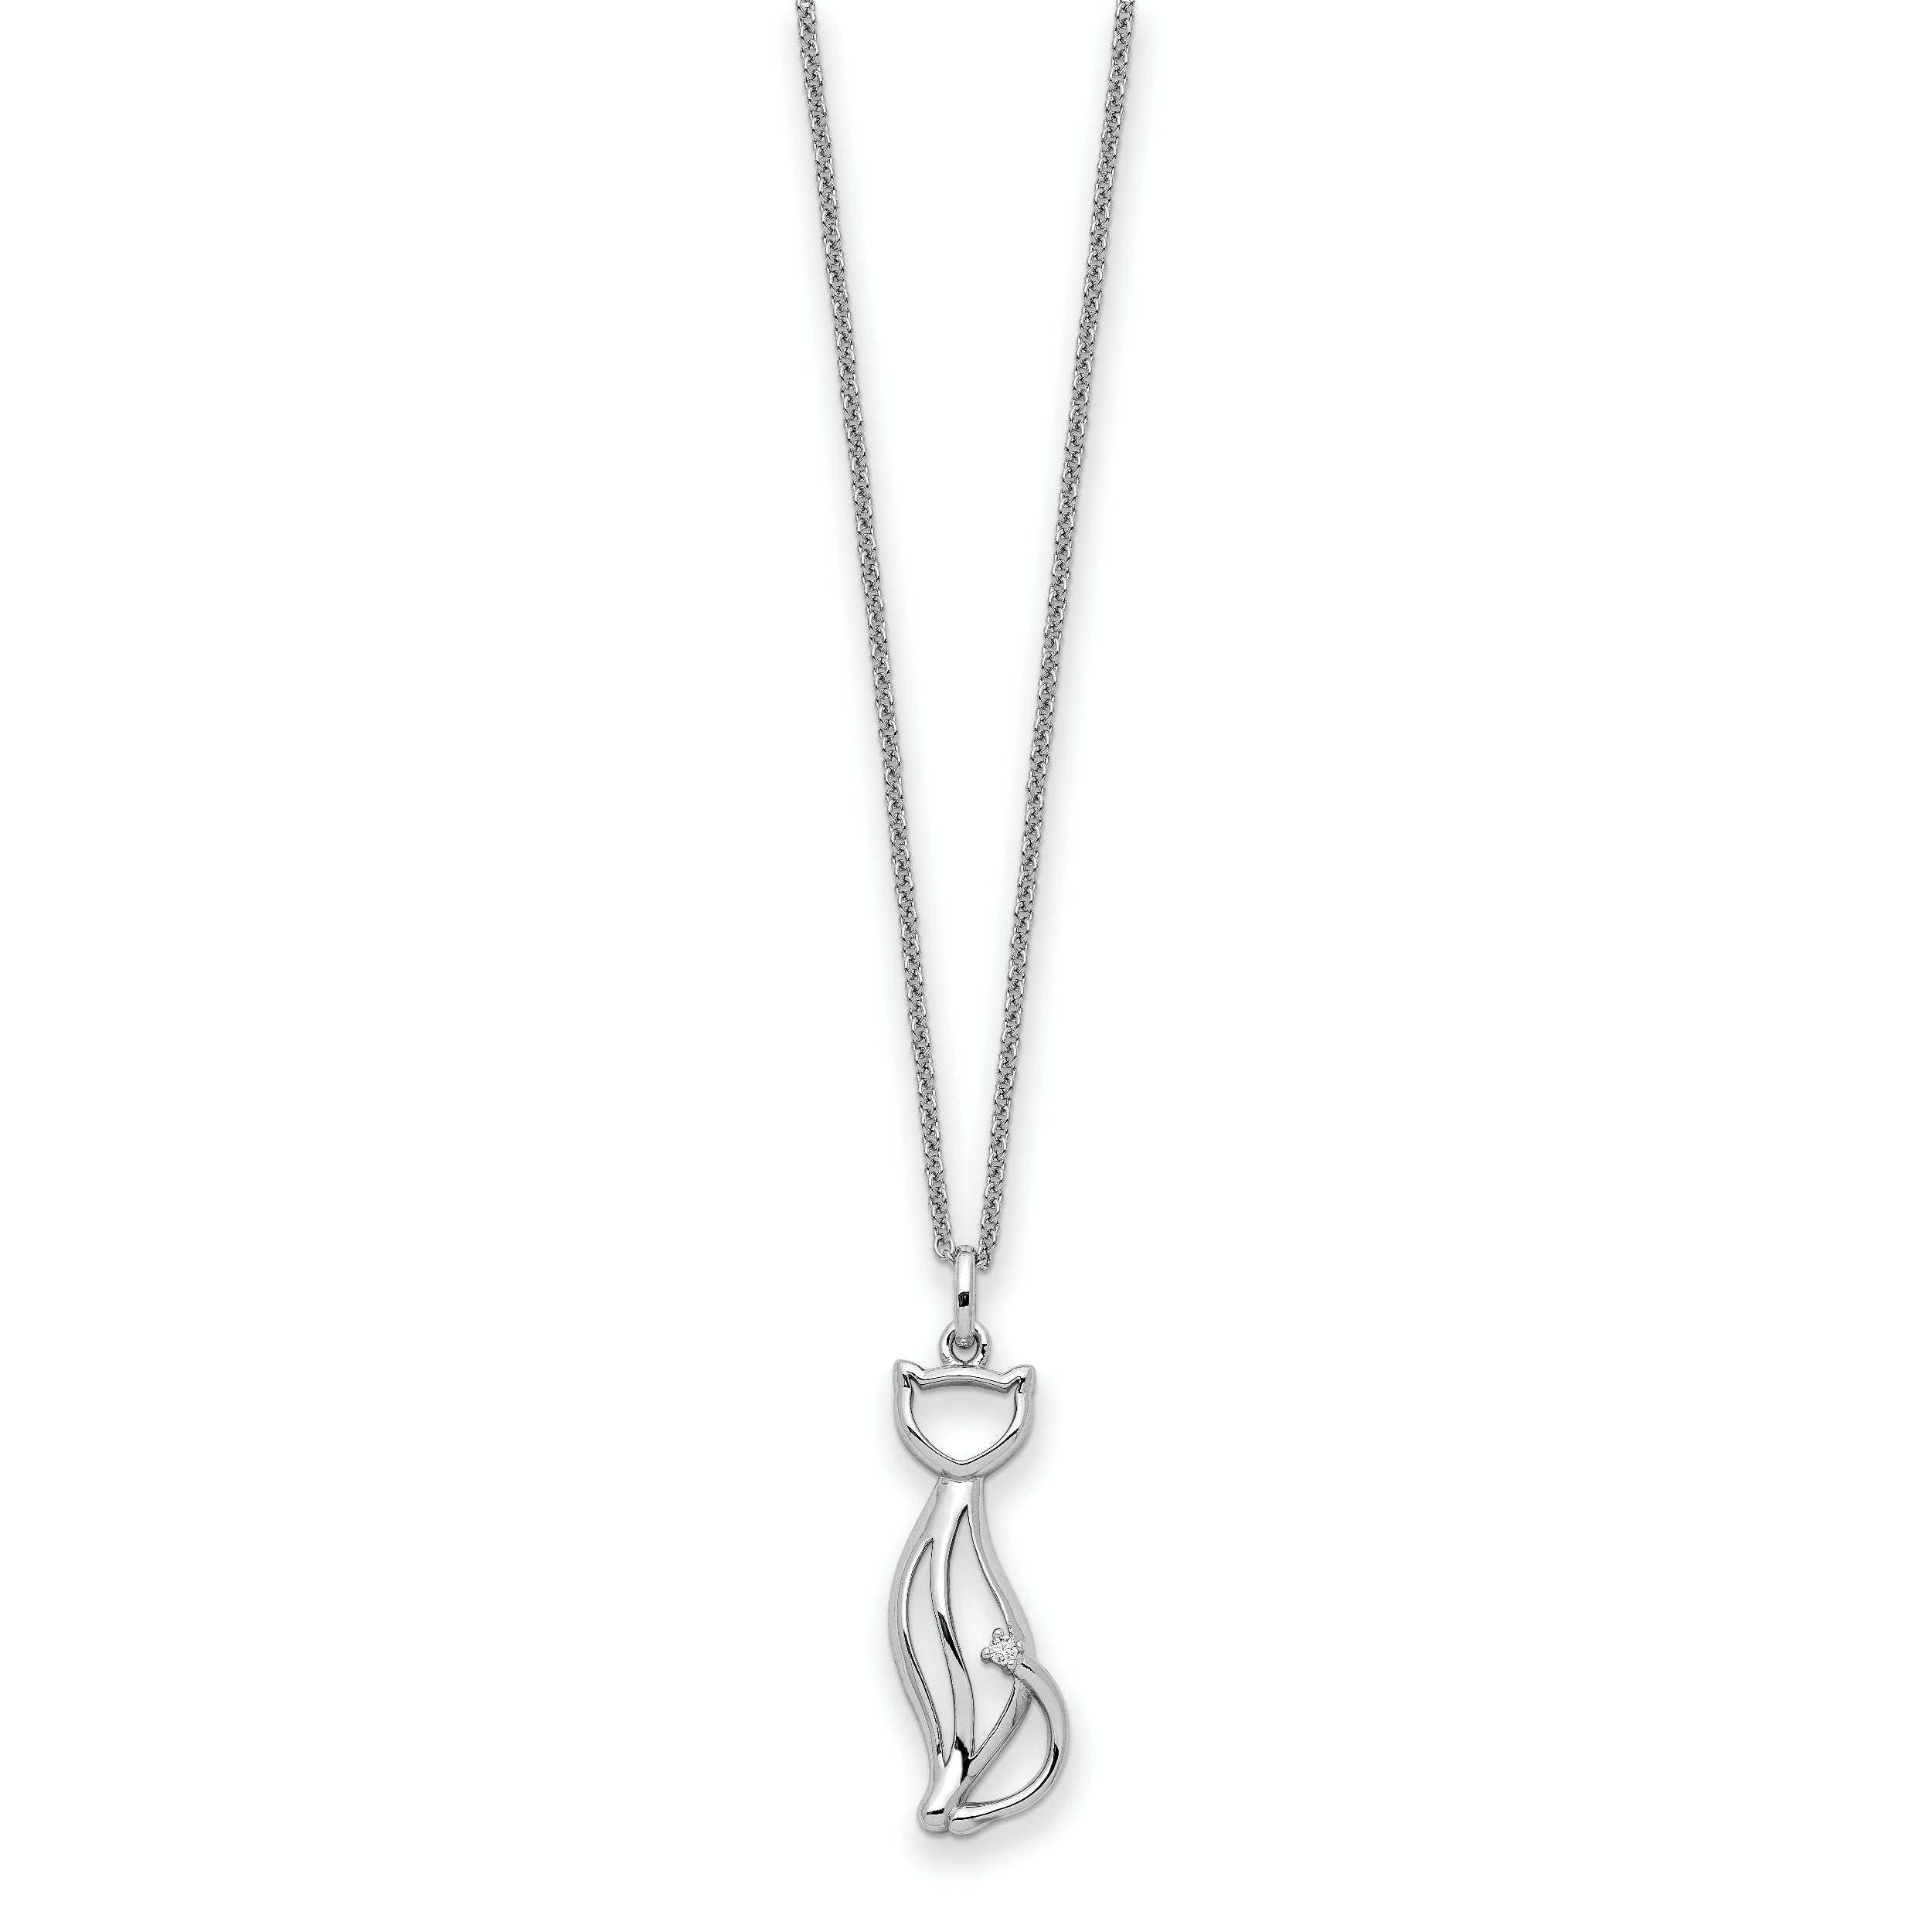 Sentimental Expressions Sterling Silver Rhodium-plated CZ Purrfect Love Cat 18in Necklace